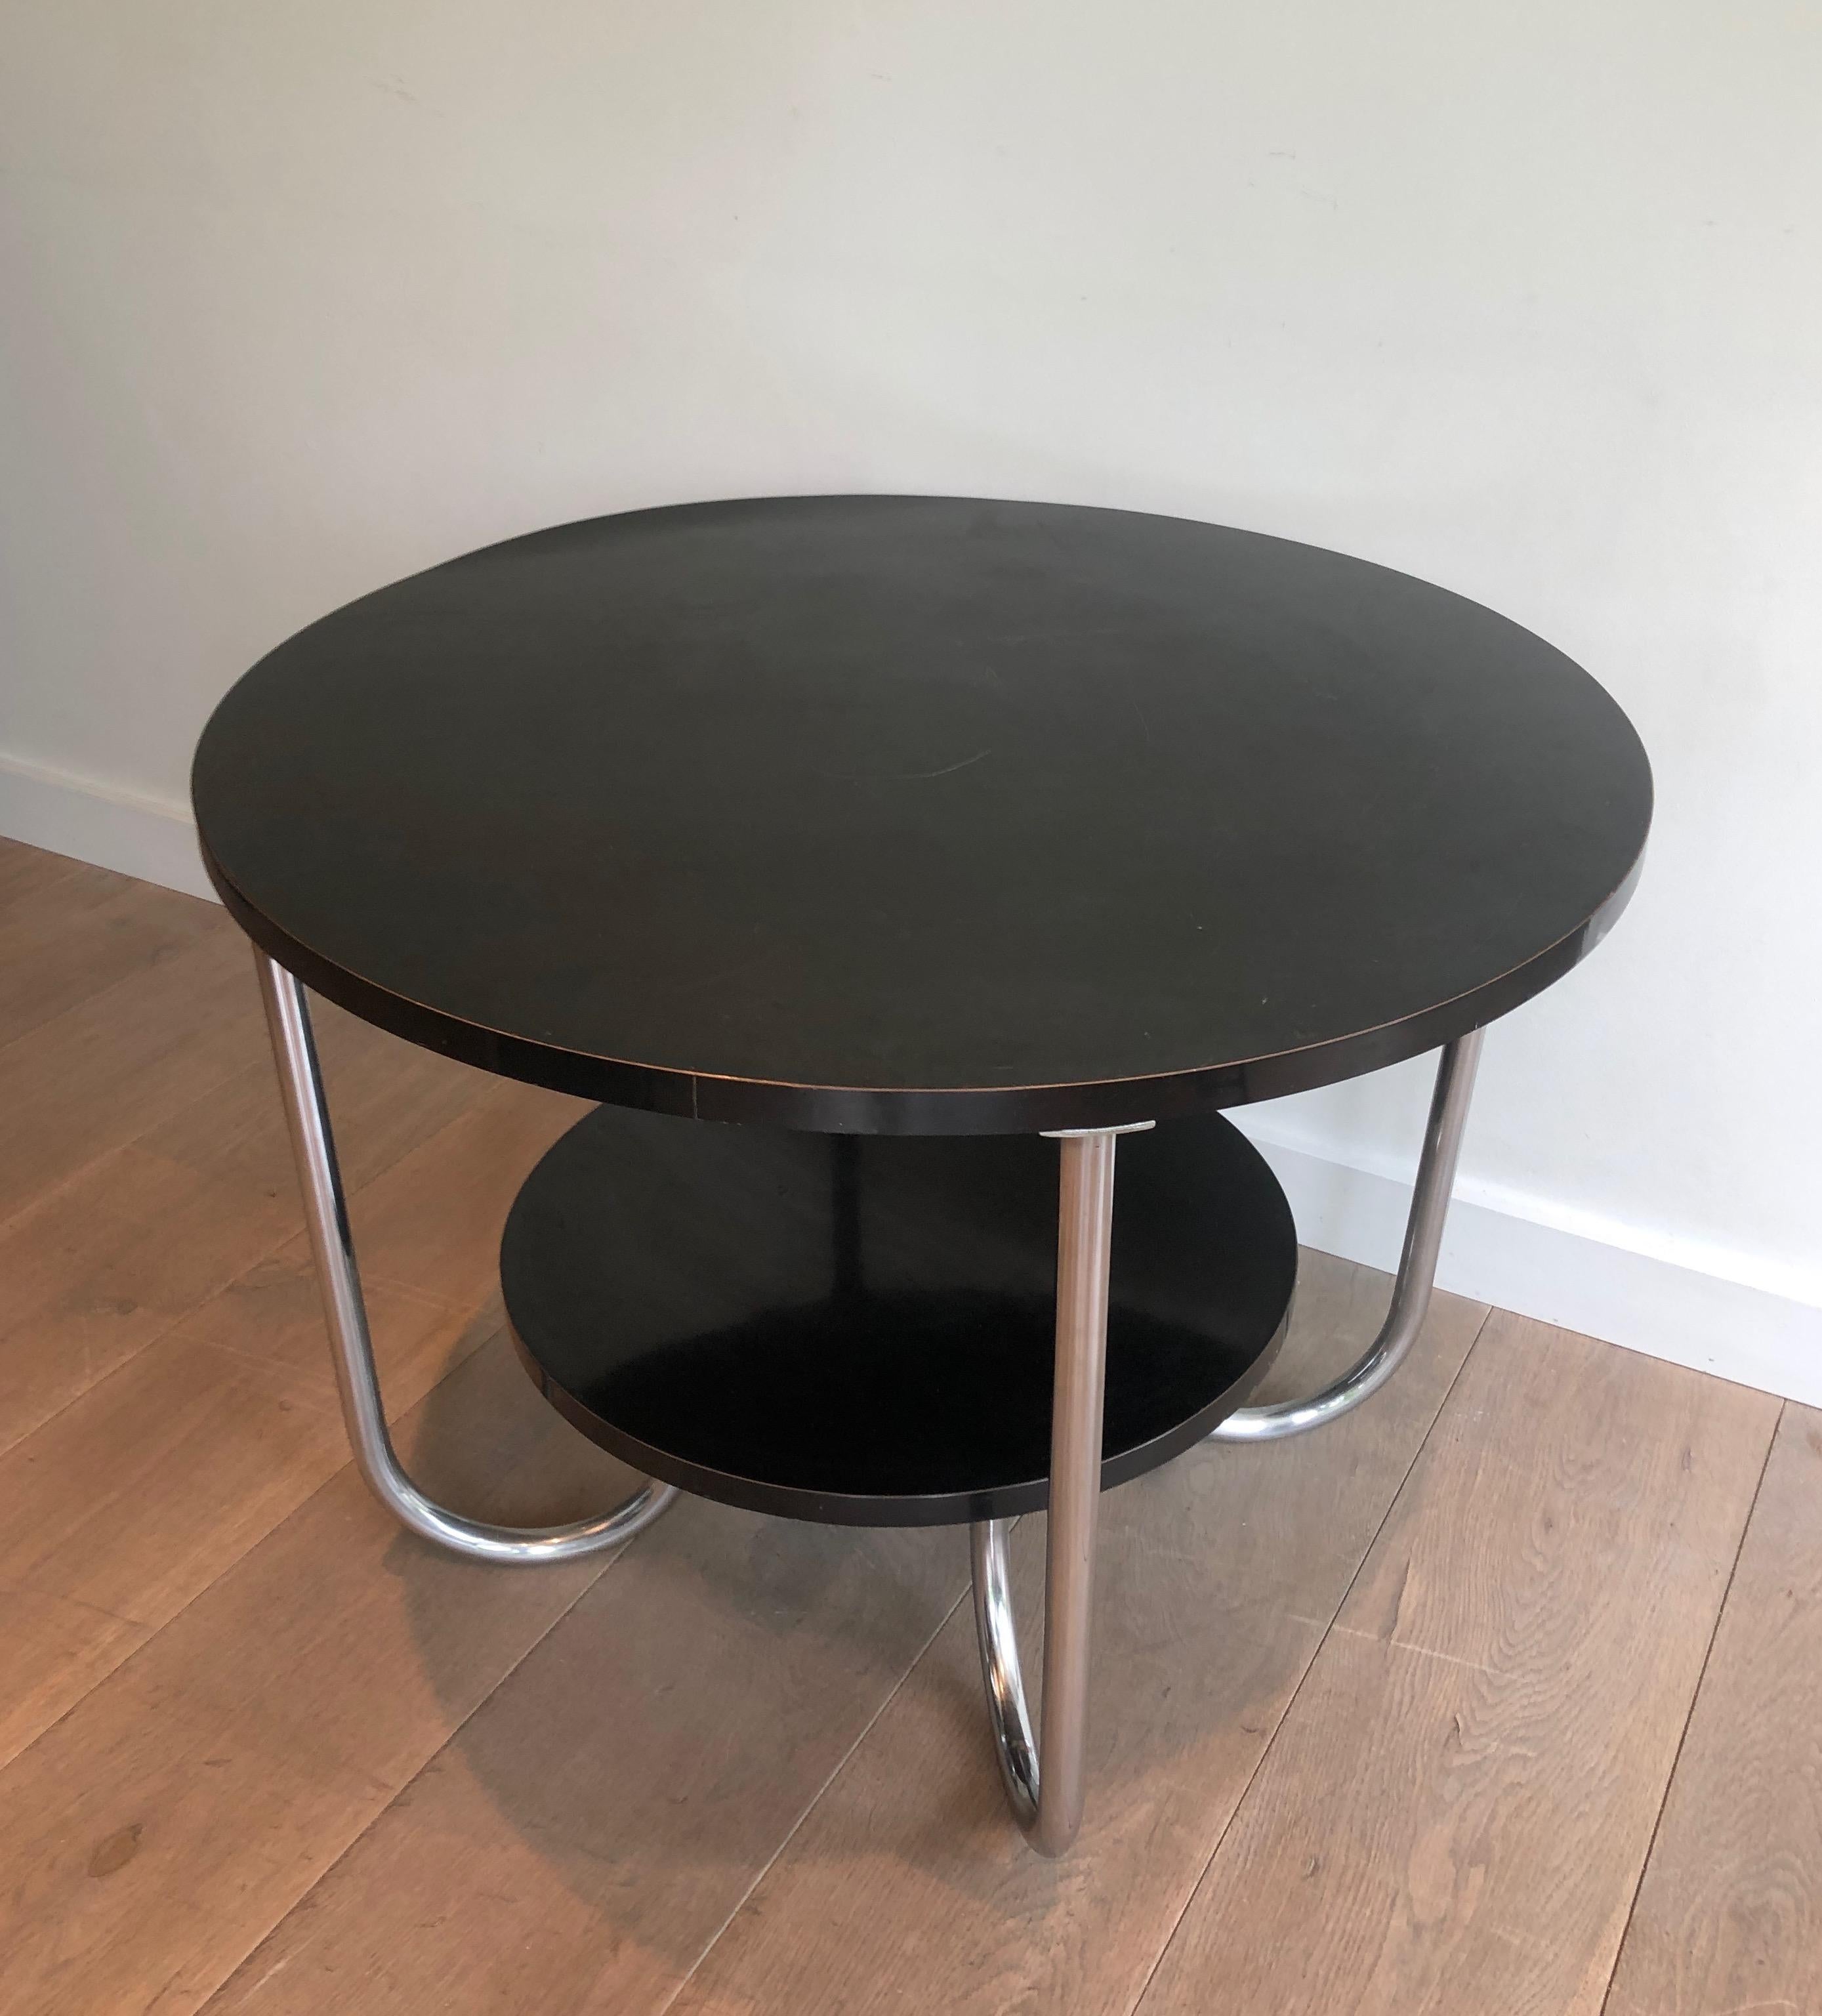 Mid-Century Modern Round Black and Chrome Gueridon, French Work, in the Style of Marcel Breuer. Ci